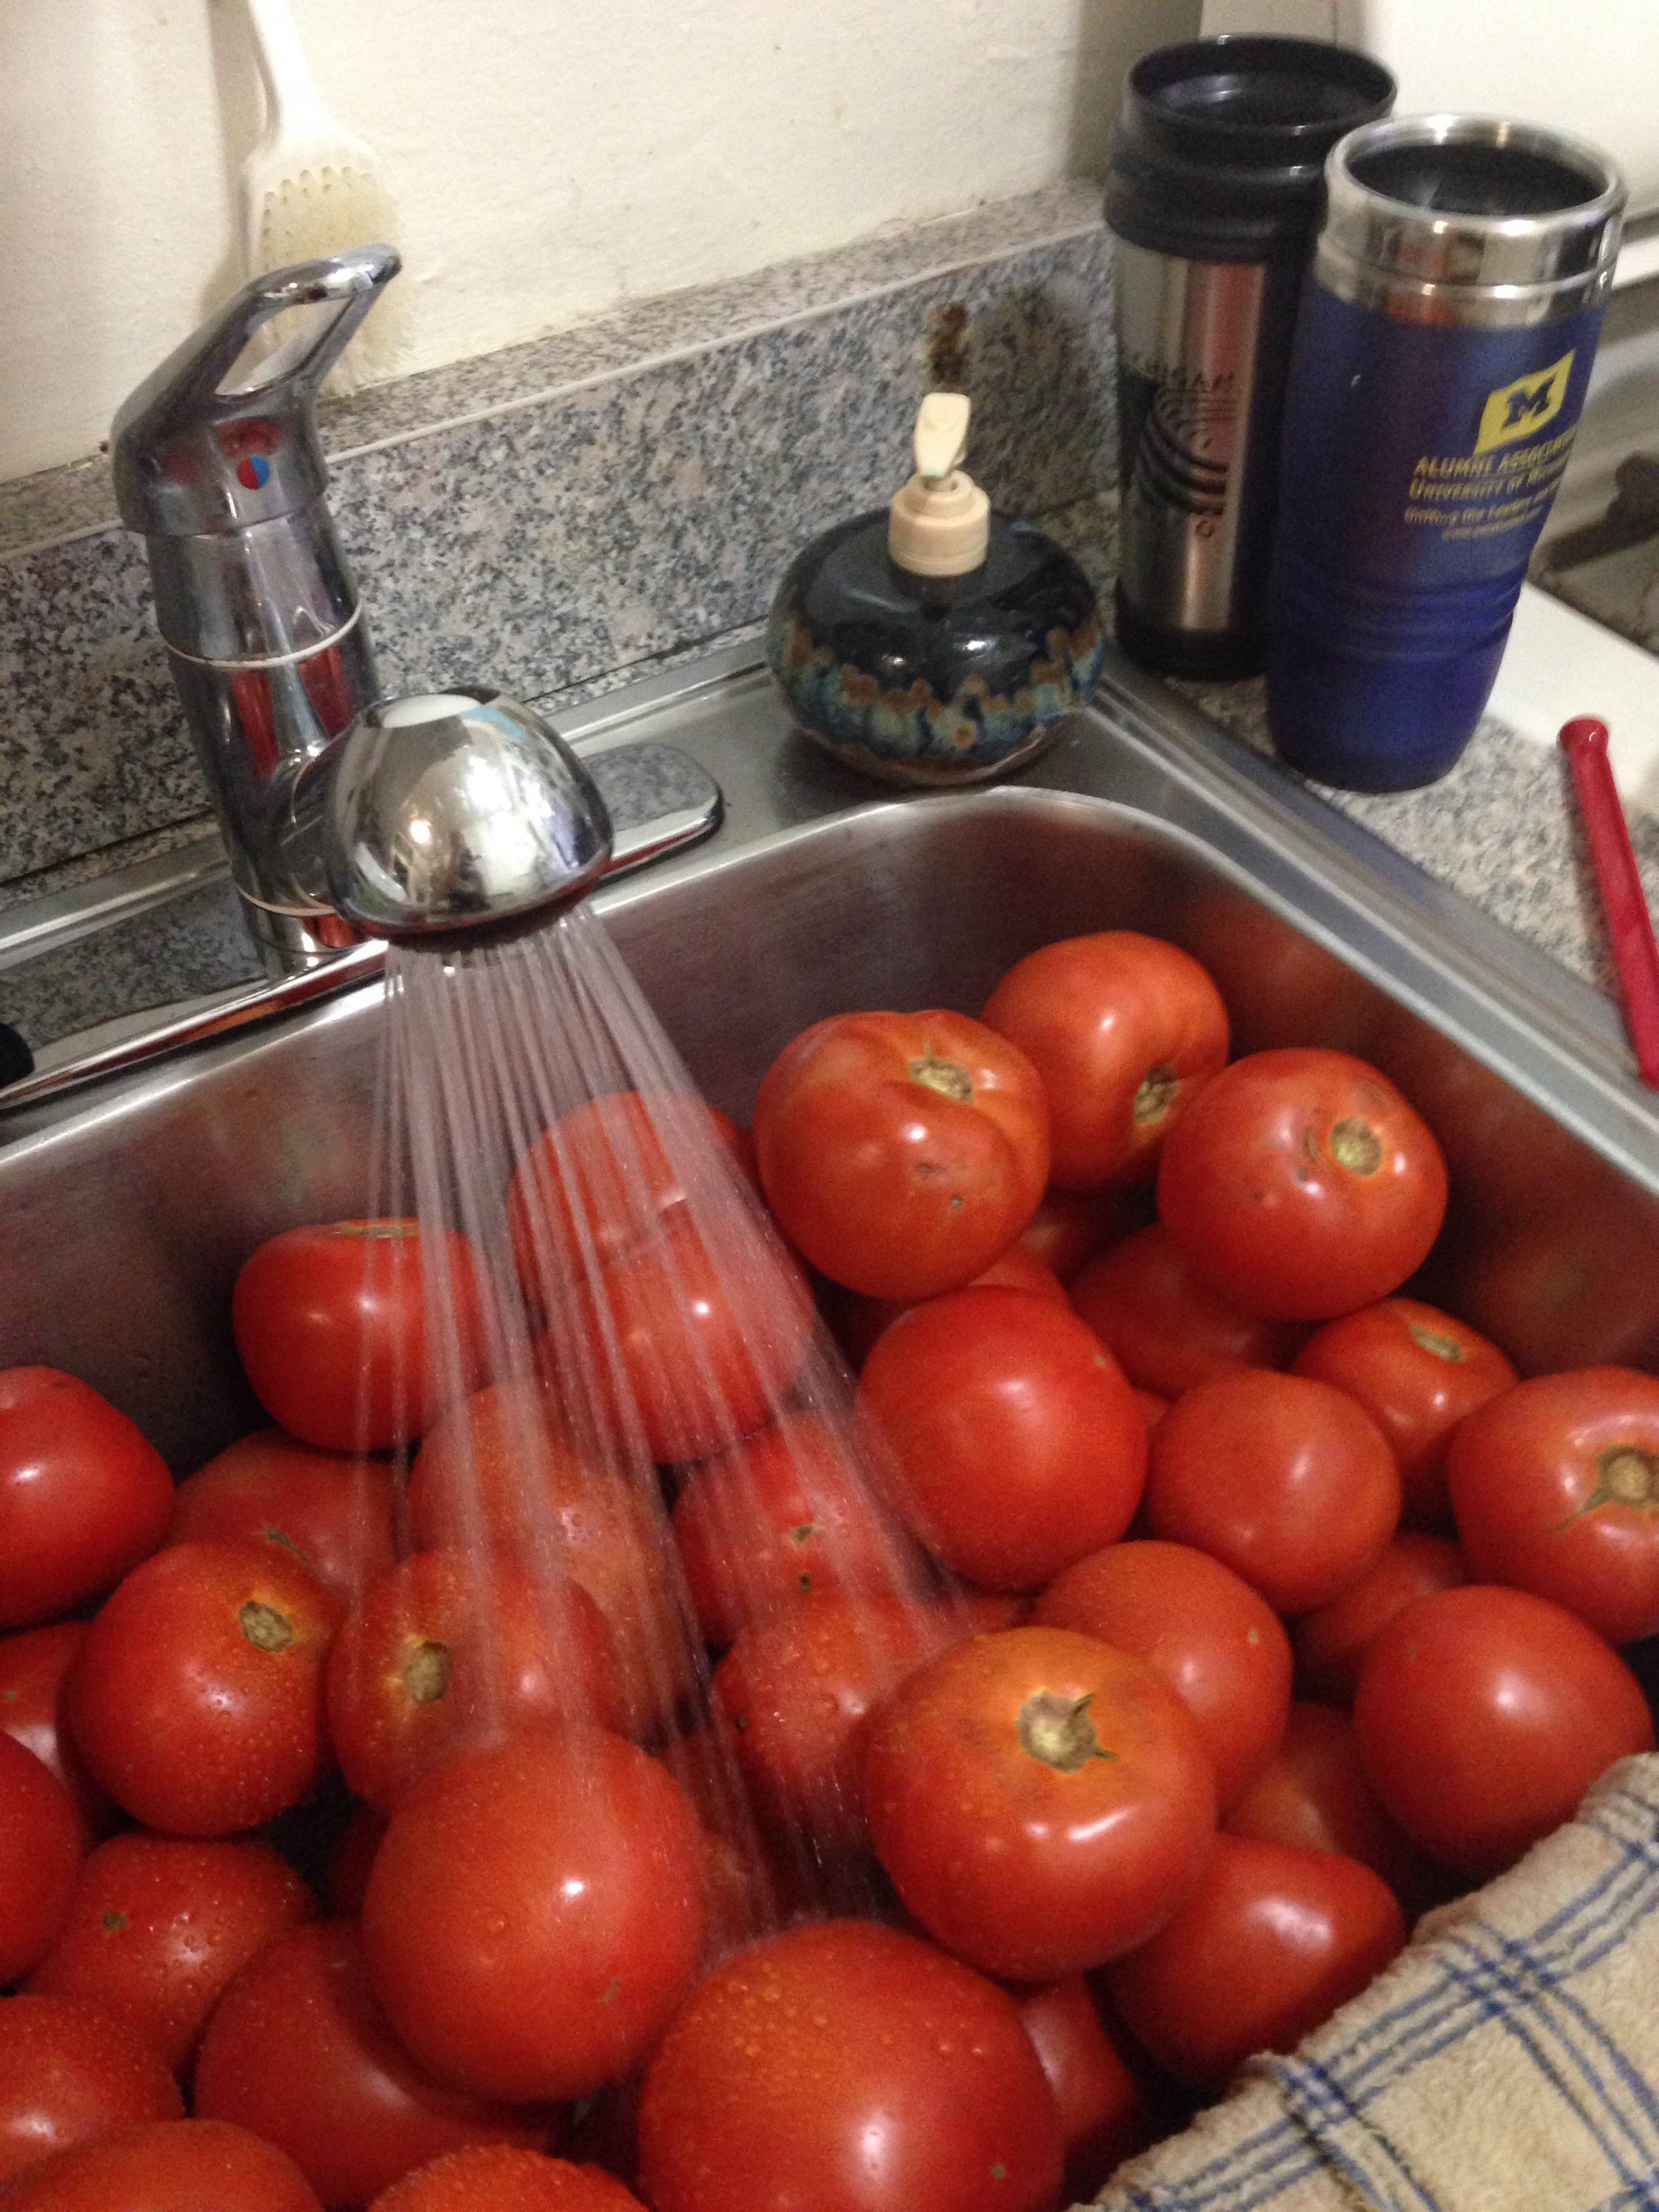 Washing the tomatoes to get them ready for canning